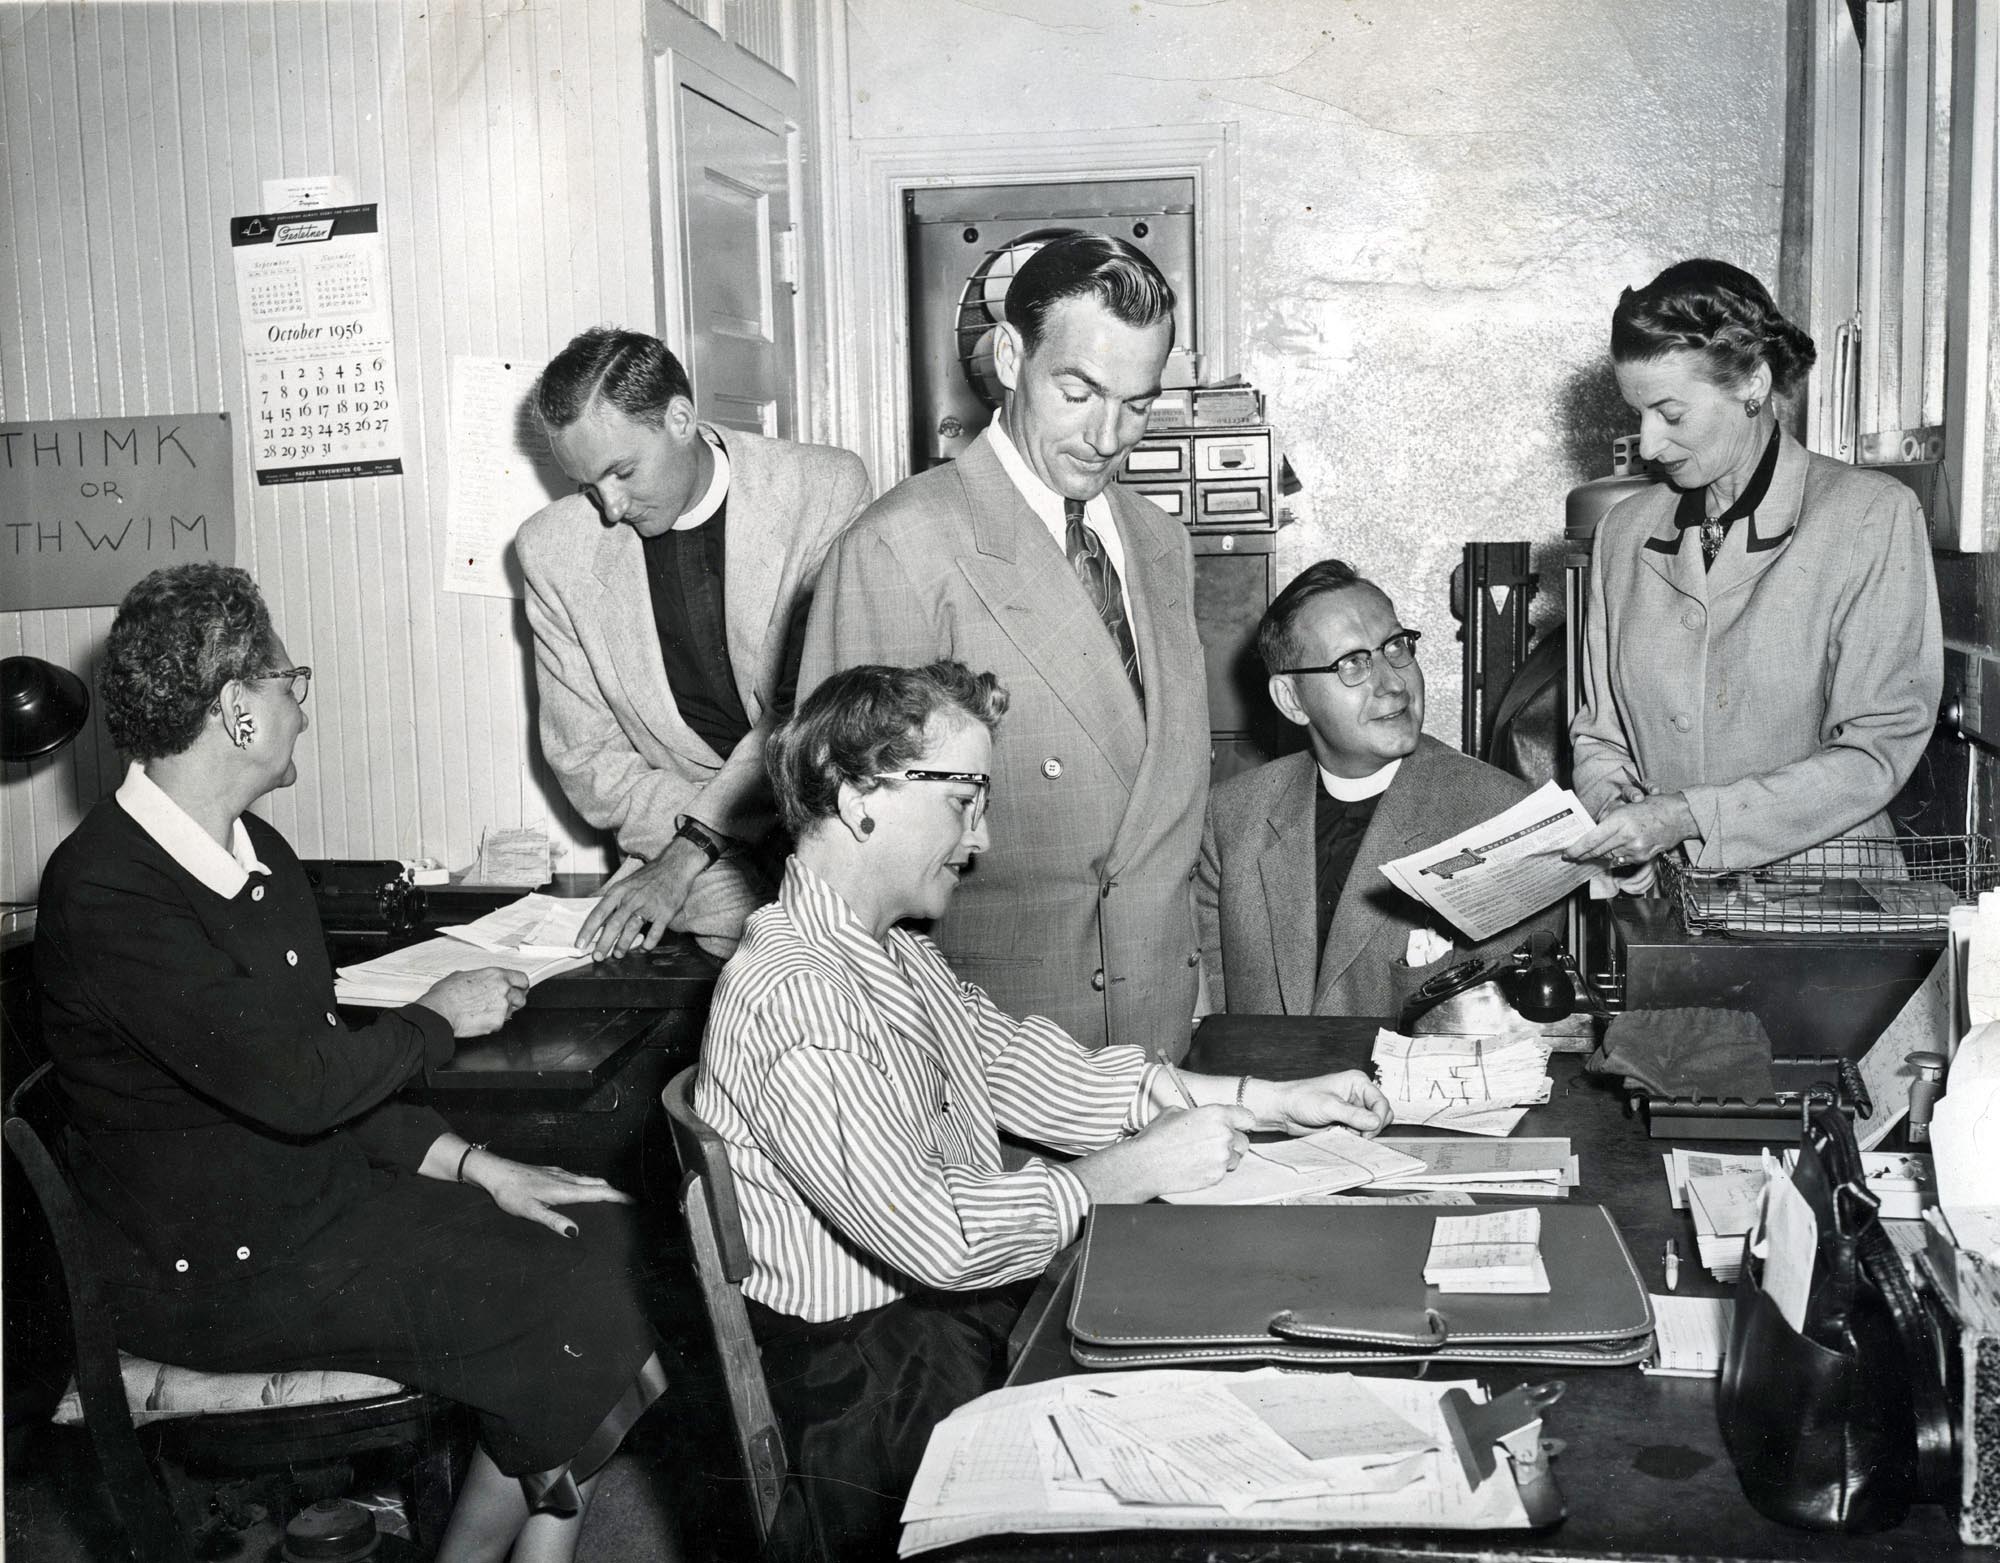 October 1956. From an 8x10 glossy photograph. "Old office in small church. Staff of St Luke's. L to R, Mabel Getchell, Rev. John Sanford, Elmer Nigg (Sexton), Rev. Morton Kelsey, Bernice Pursel, and Virginia Speer (in front). 1956"

This was St Lukes in Monrovia CA.